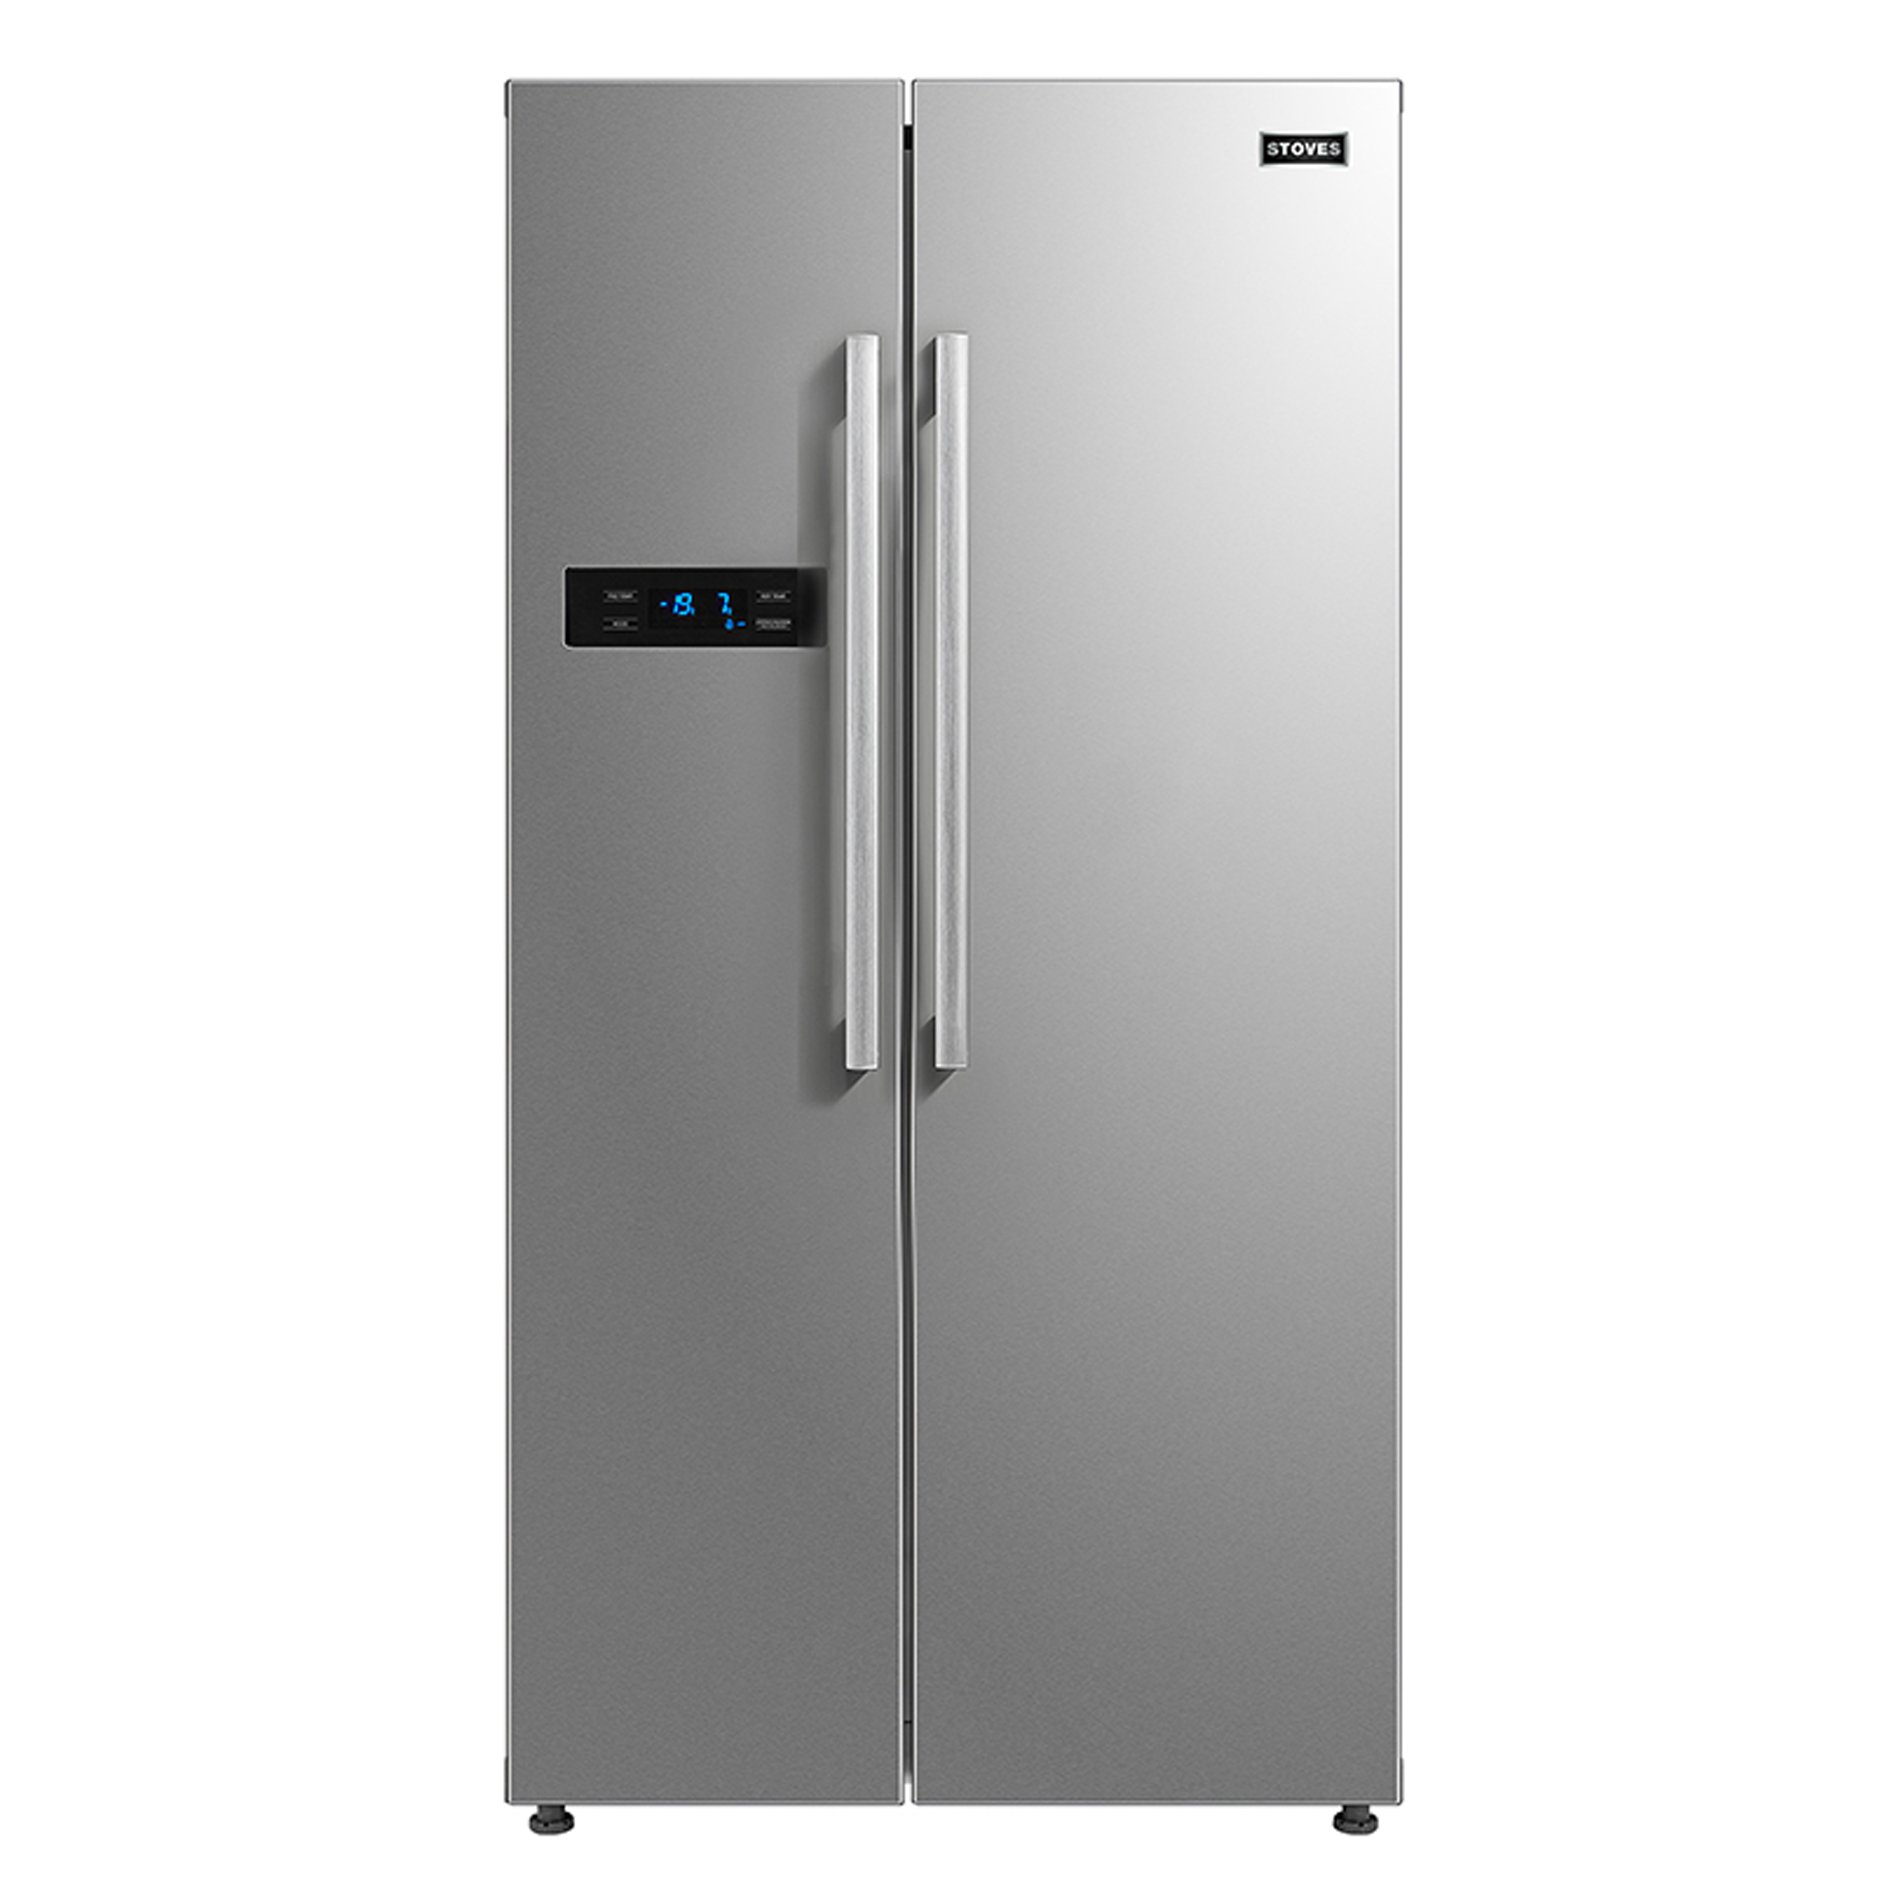 American Style fridge freezer, with gross fridge capacity of 339L & freezer capacity of 248L. Features include total no frost, and digital control